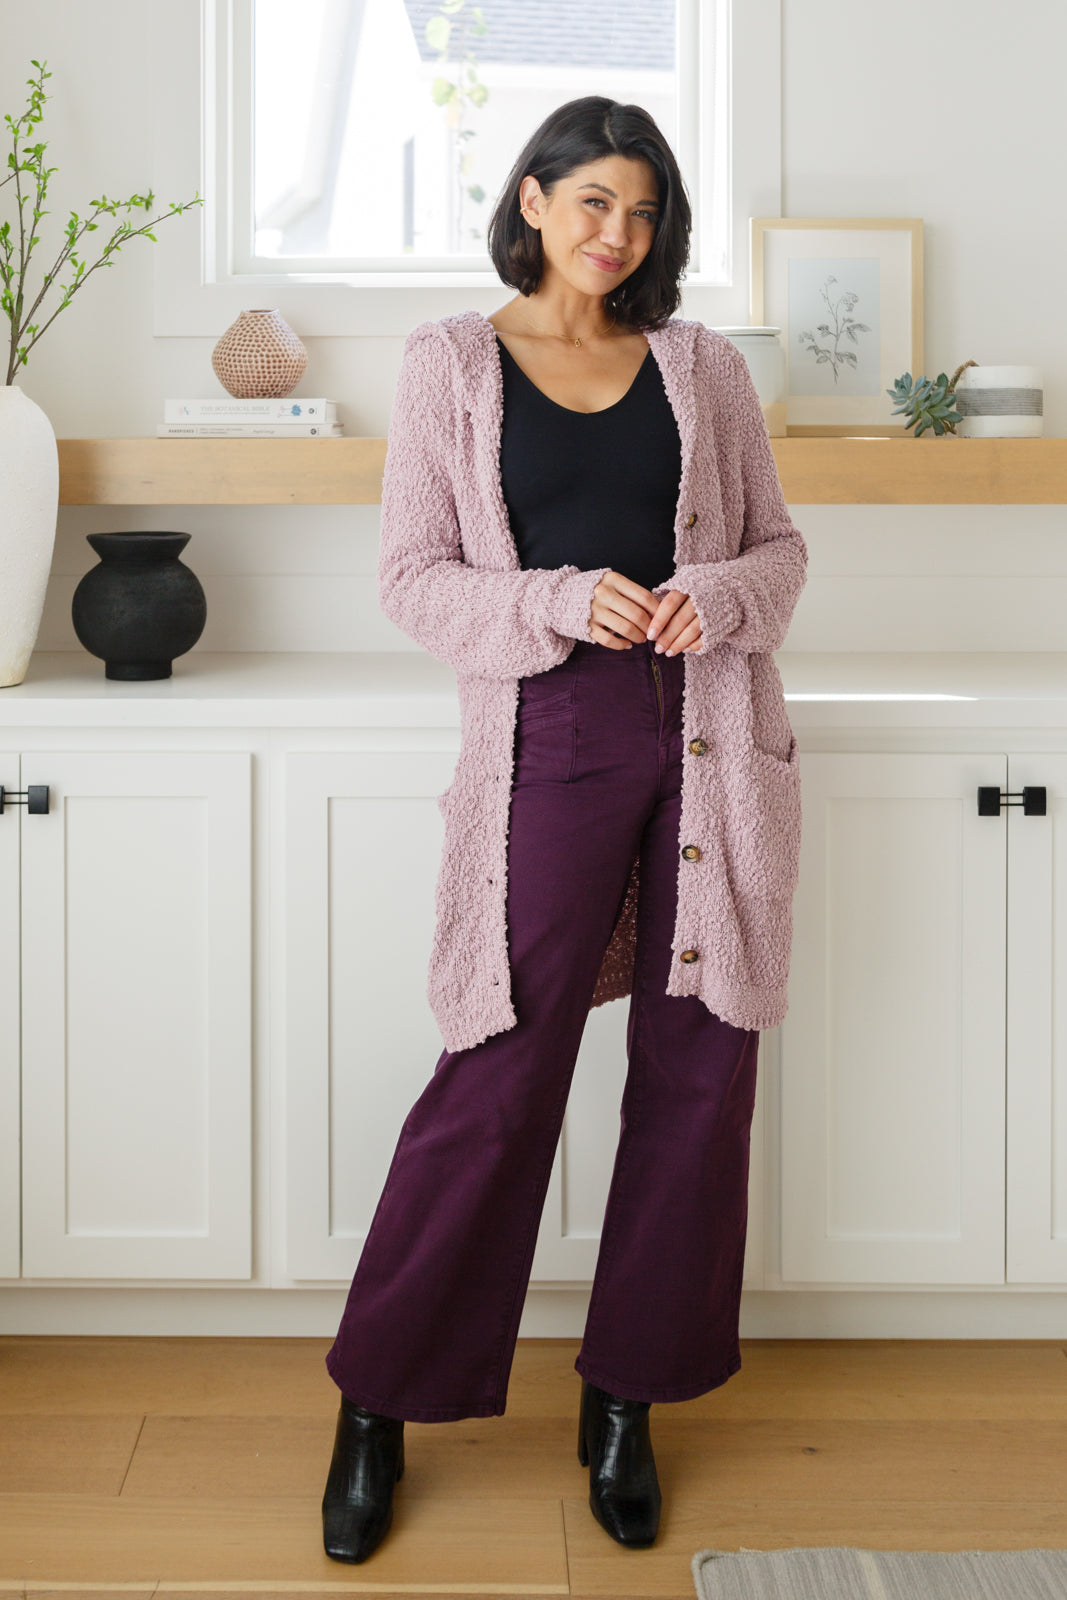 Soft Wisteria Hooded Cardigan - Mulberry Skies